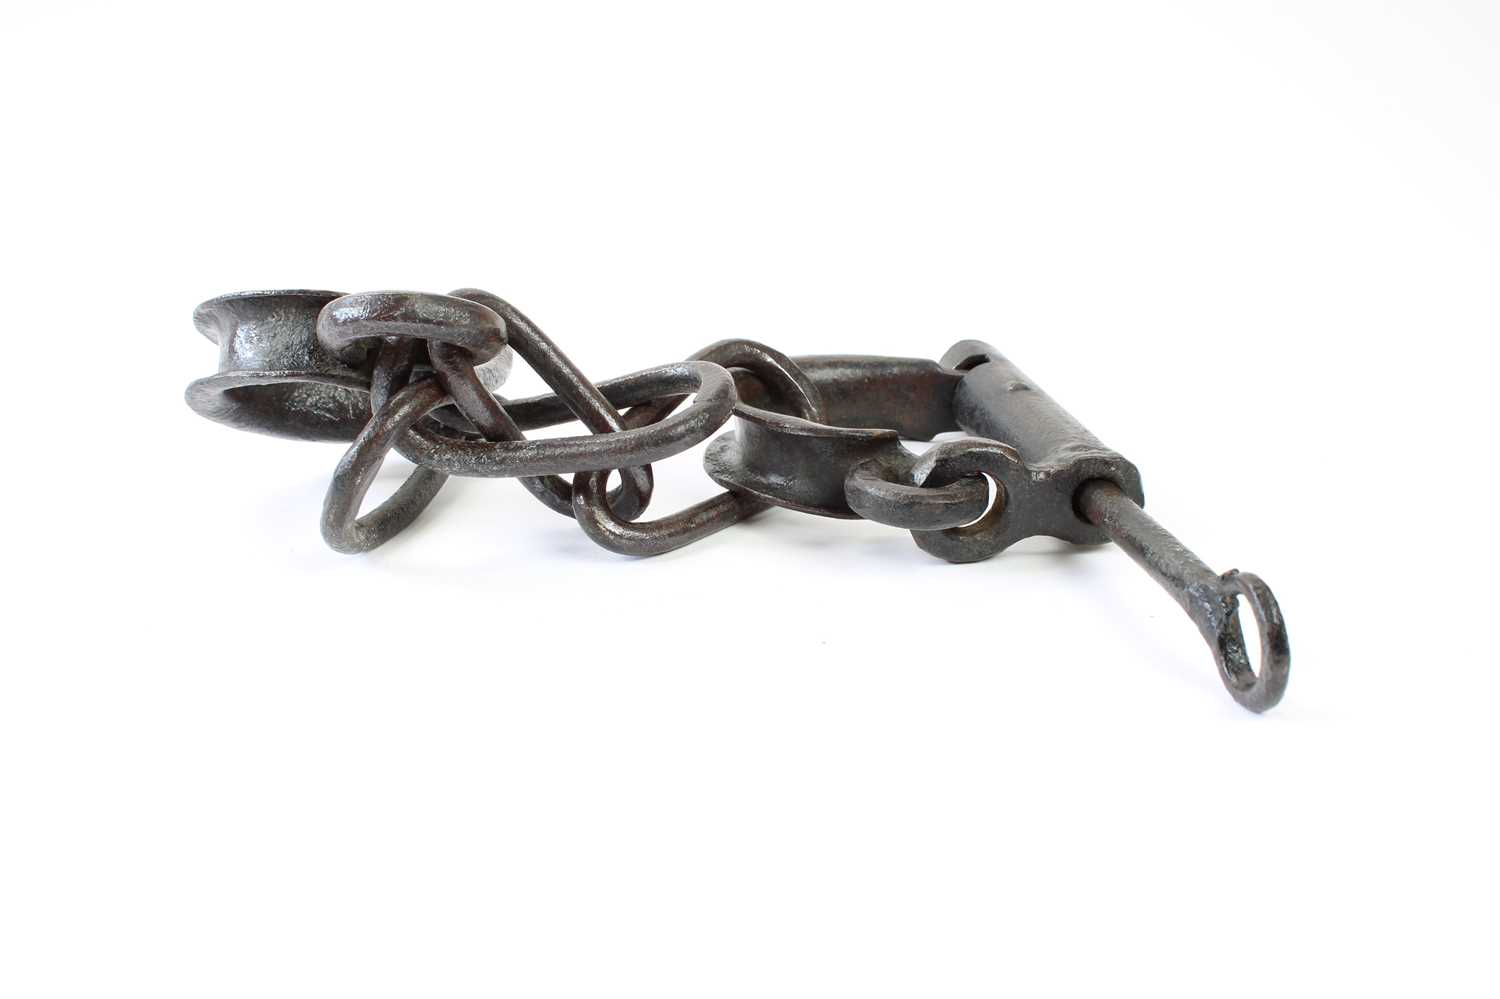 19th Century Leg Irons or Shackles - Image 2 of 2